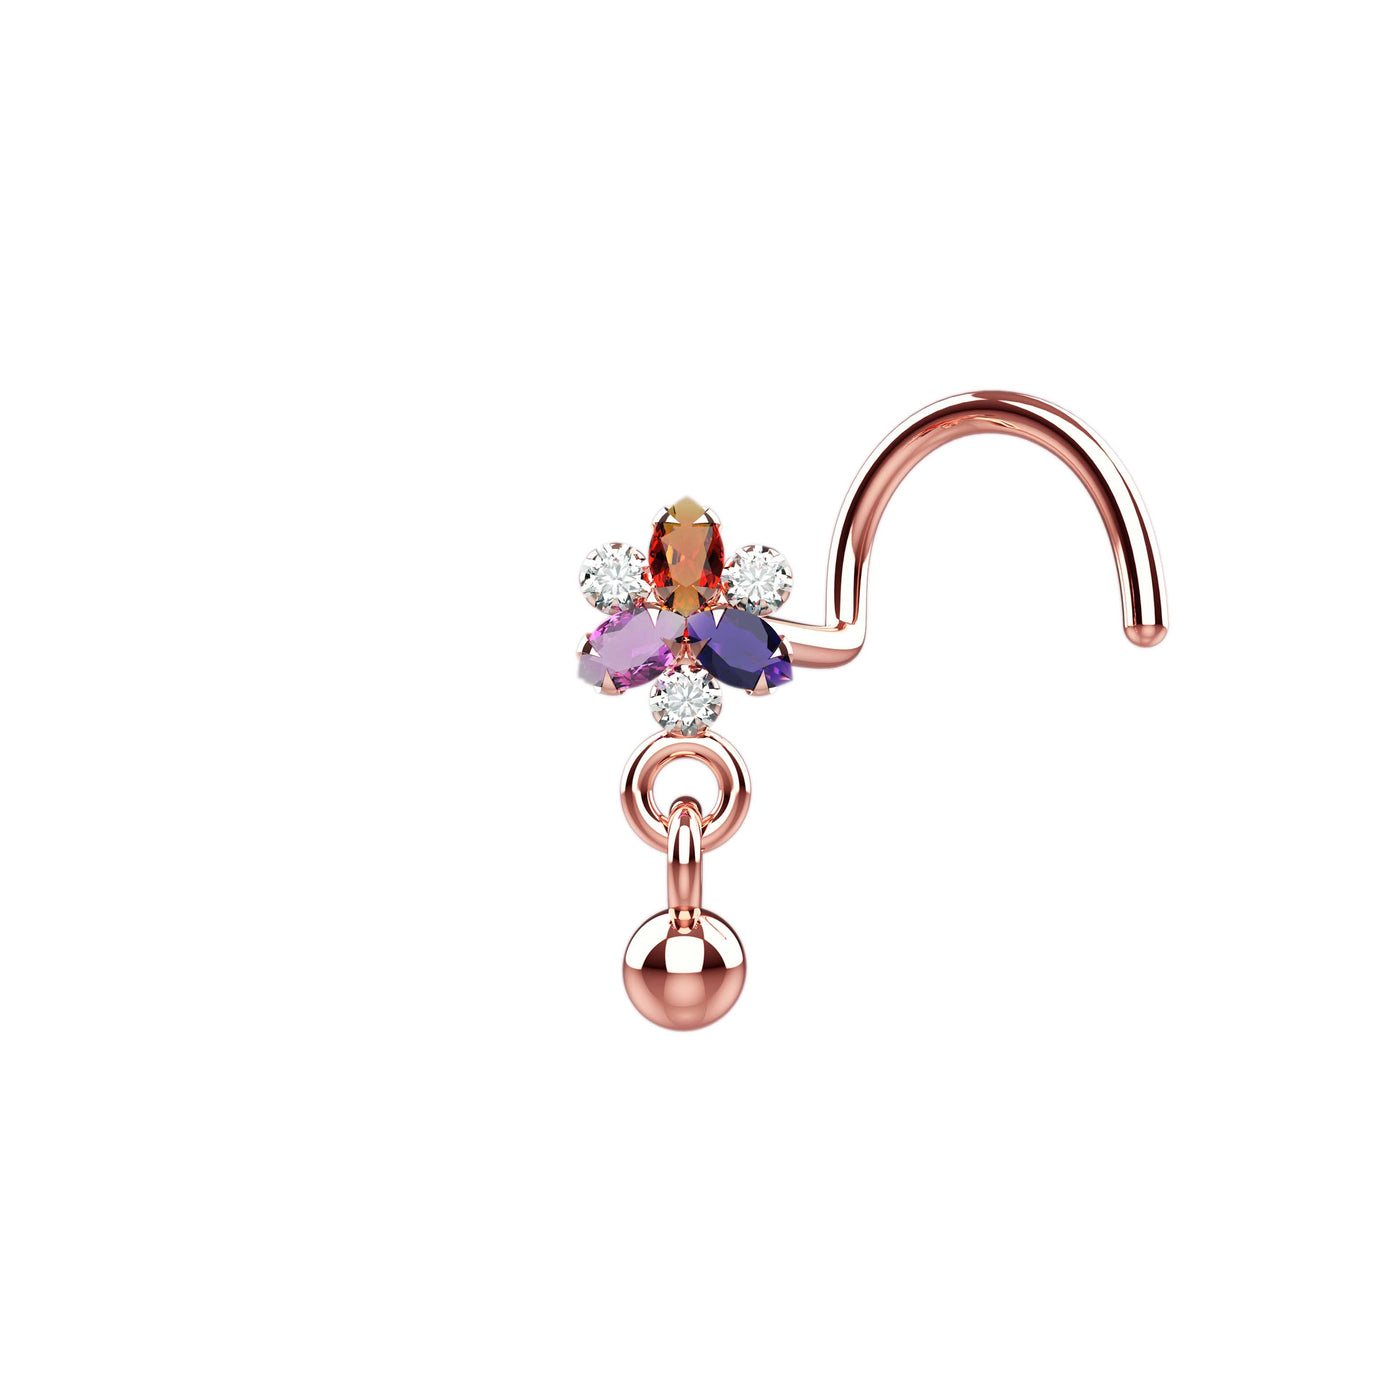 Artisan rose gold nose jewelry with dangle